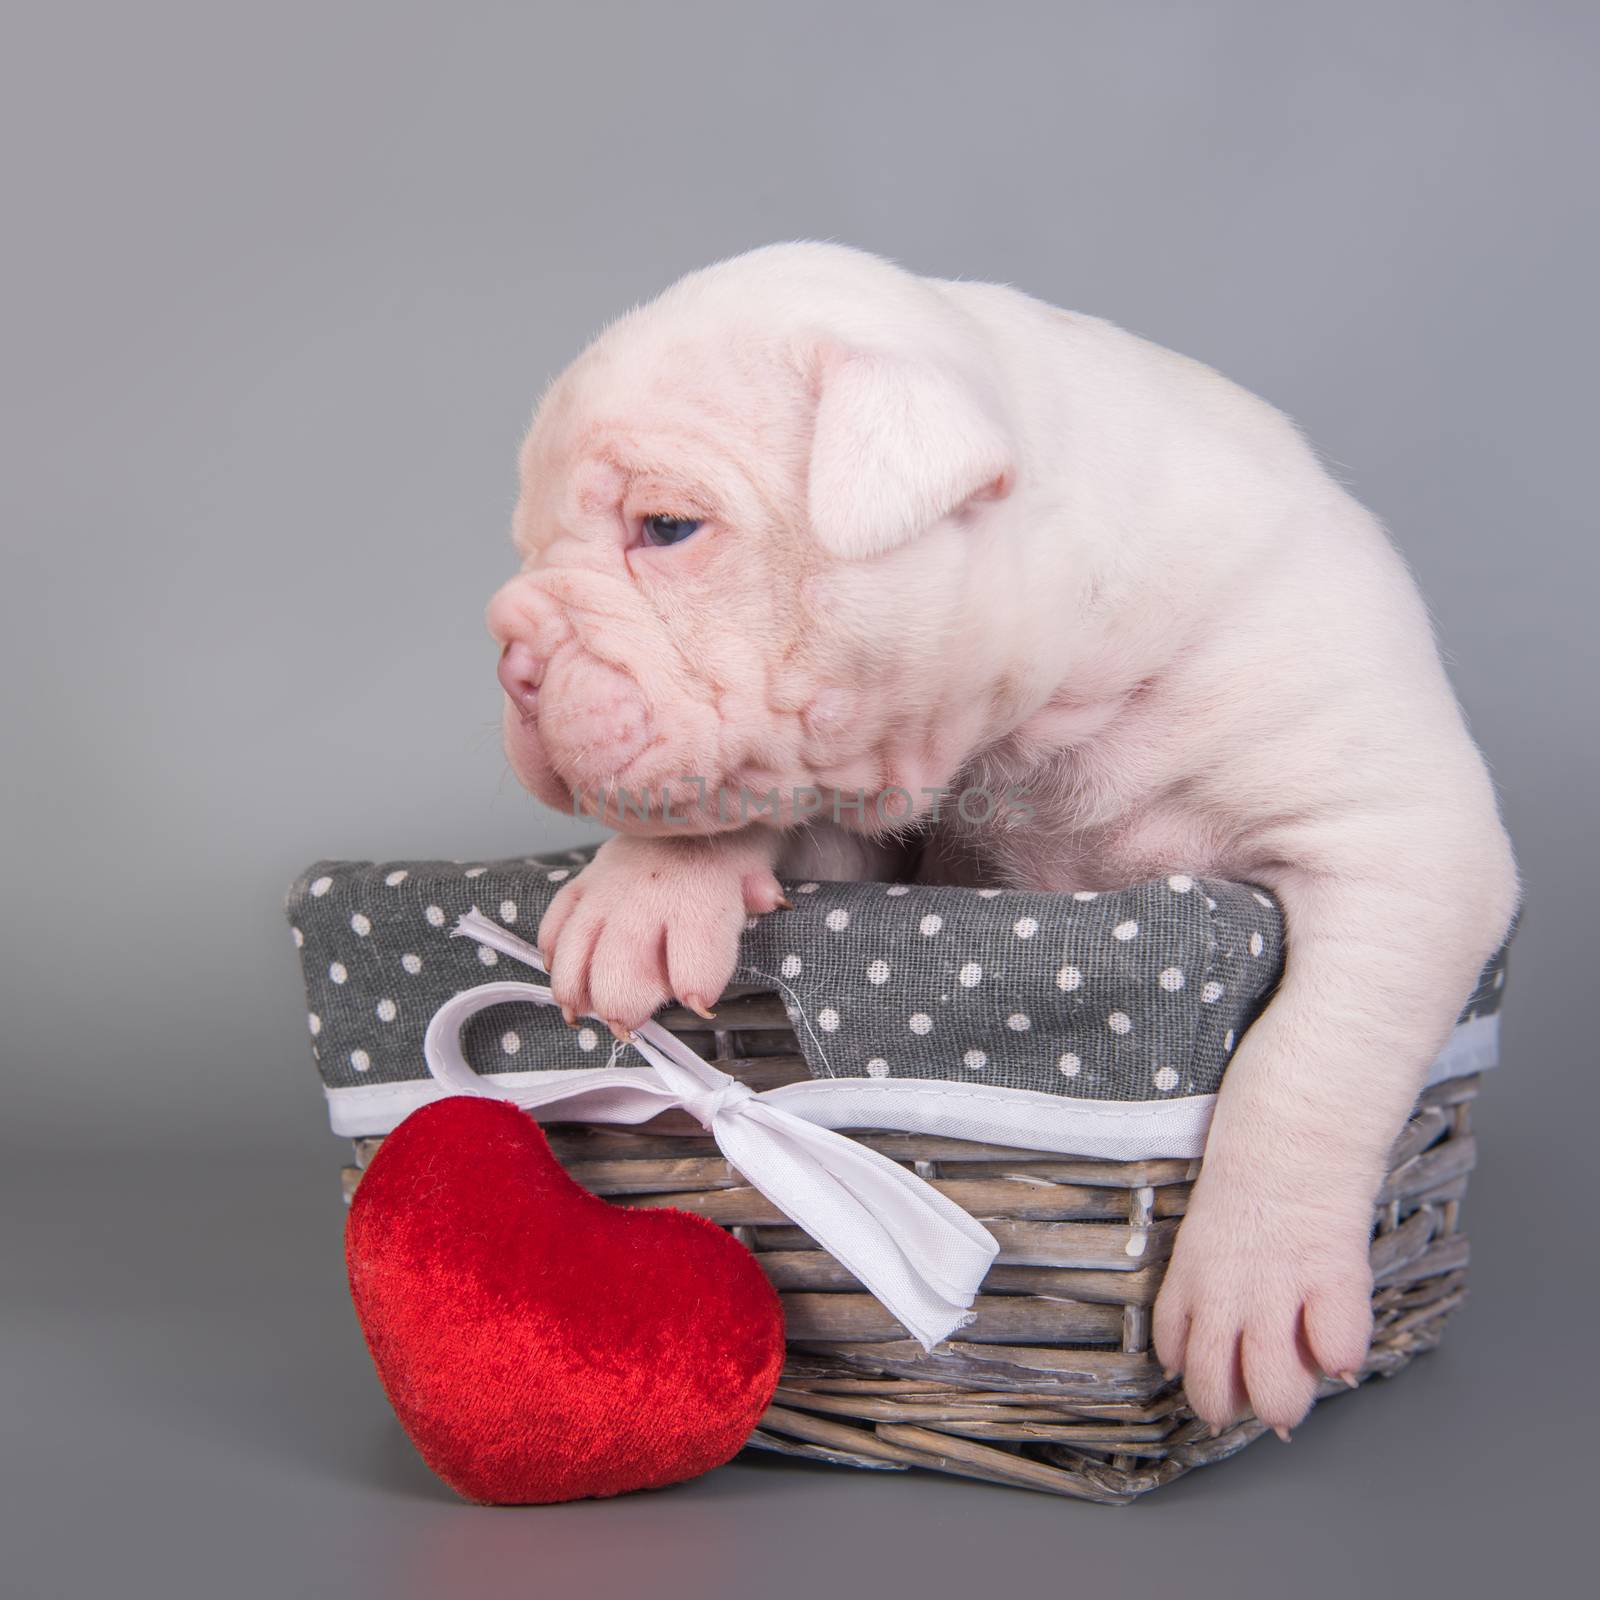 American Bulldog puppy dog in a basket with heart by infinityyy